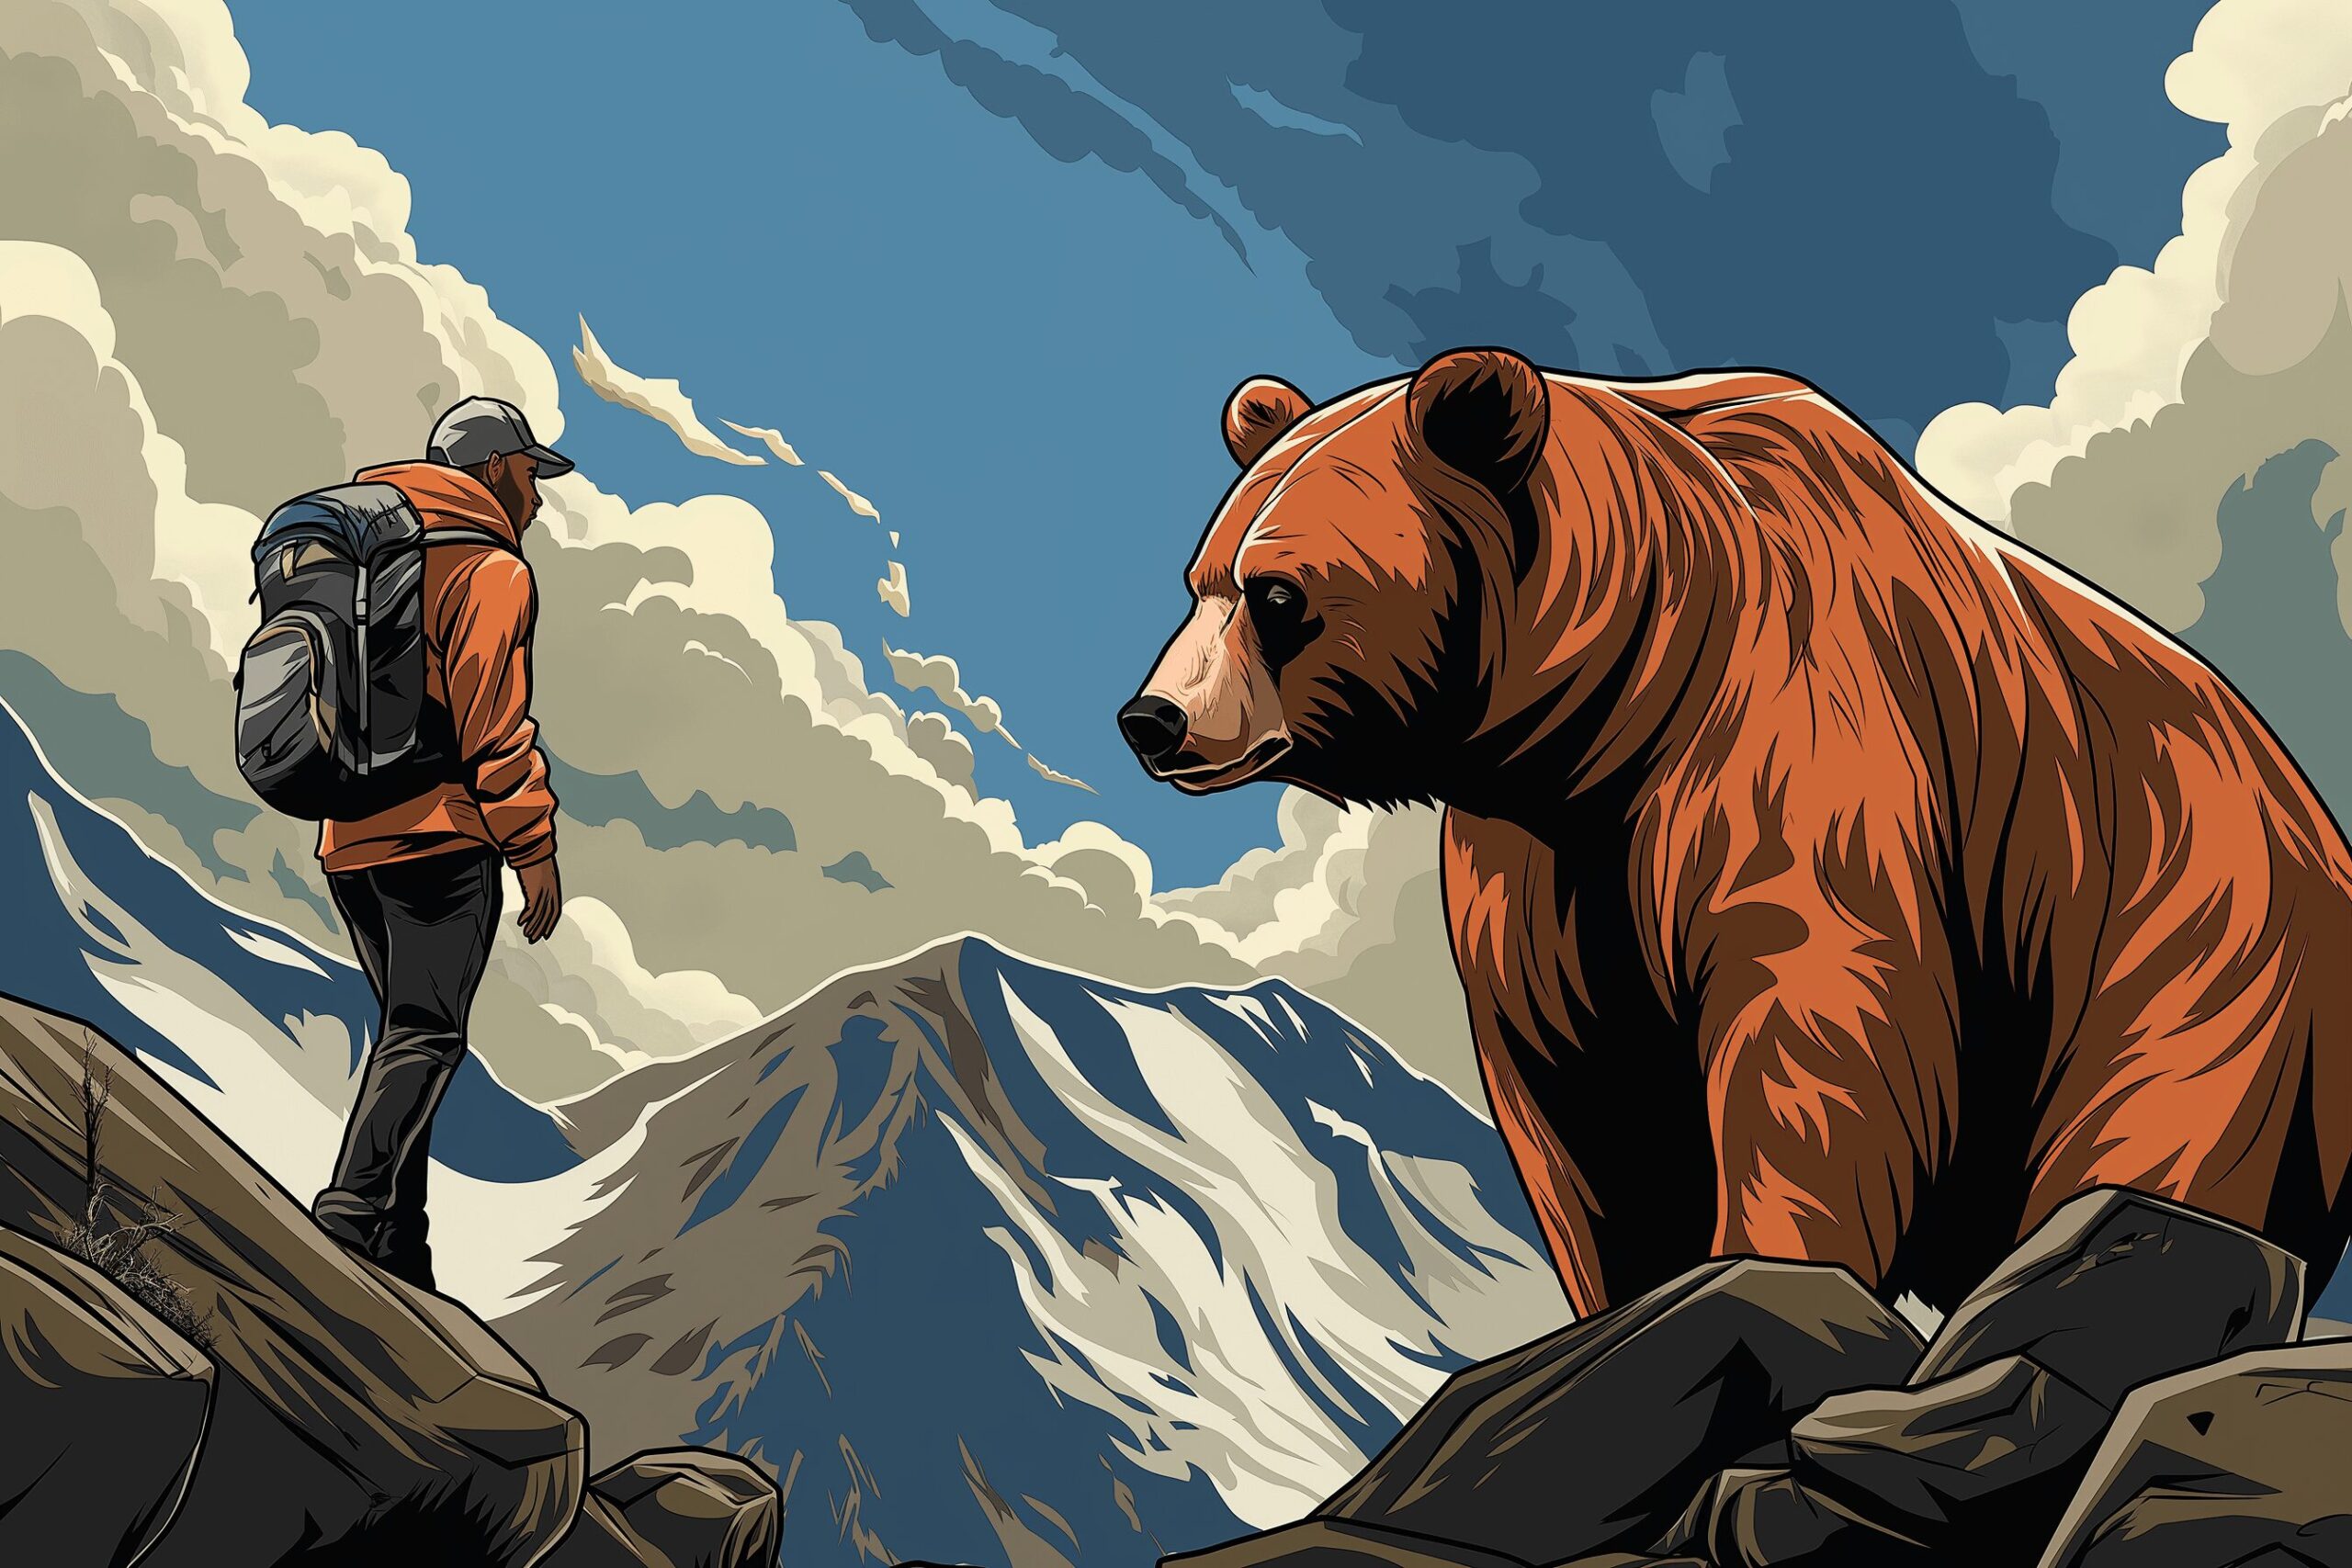 A hiker encountering a grizzly bear